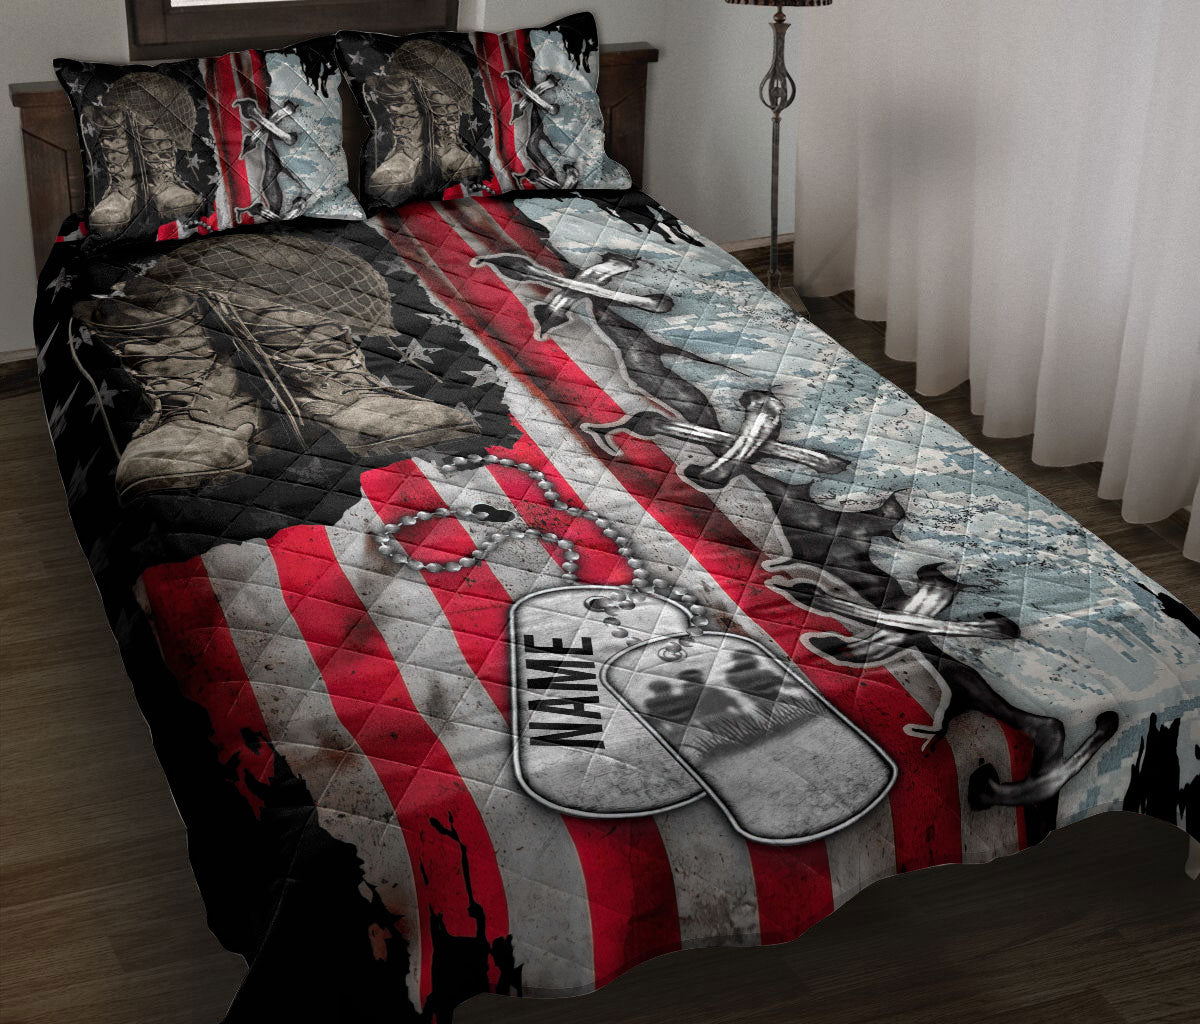 Ohaprints-Quilt-Bed-Set-Pillowcase-Veteran-Boots-Soldier-Backpack-Boost-Army-Gift-Custom-Personalized-Name-Blanket-Bedspread-Bedding-507-Throw (55'' x 60'')